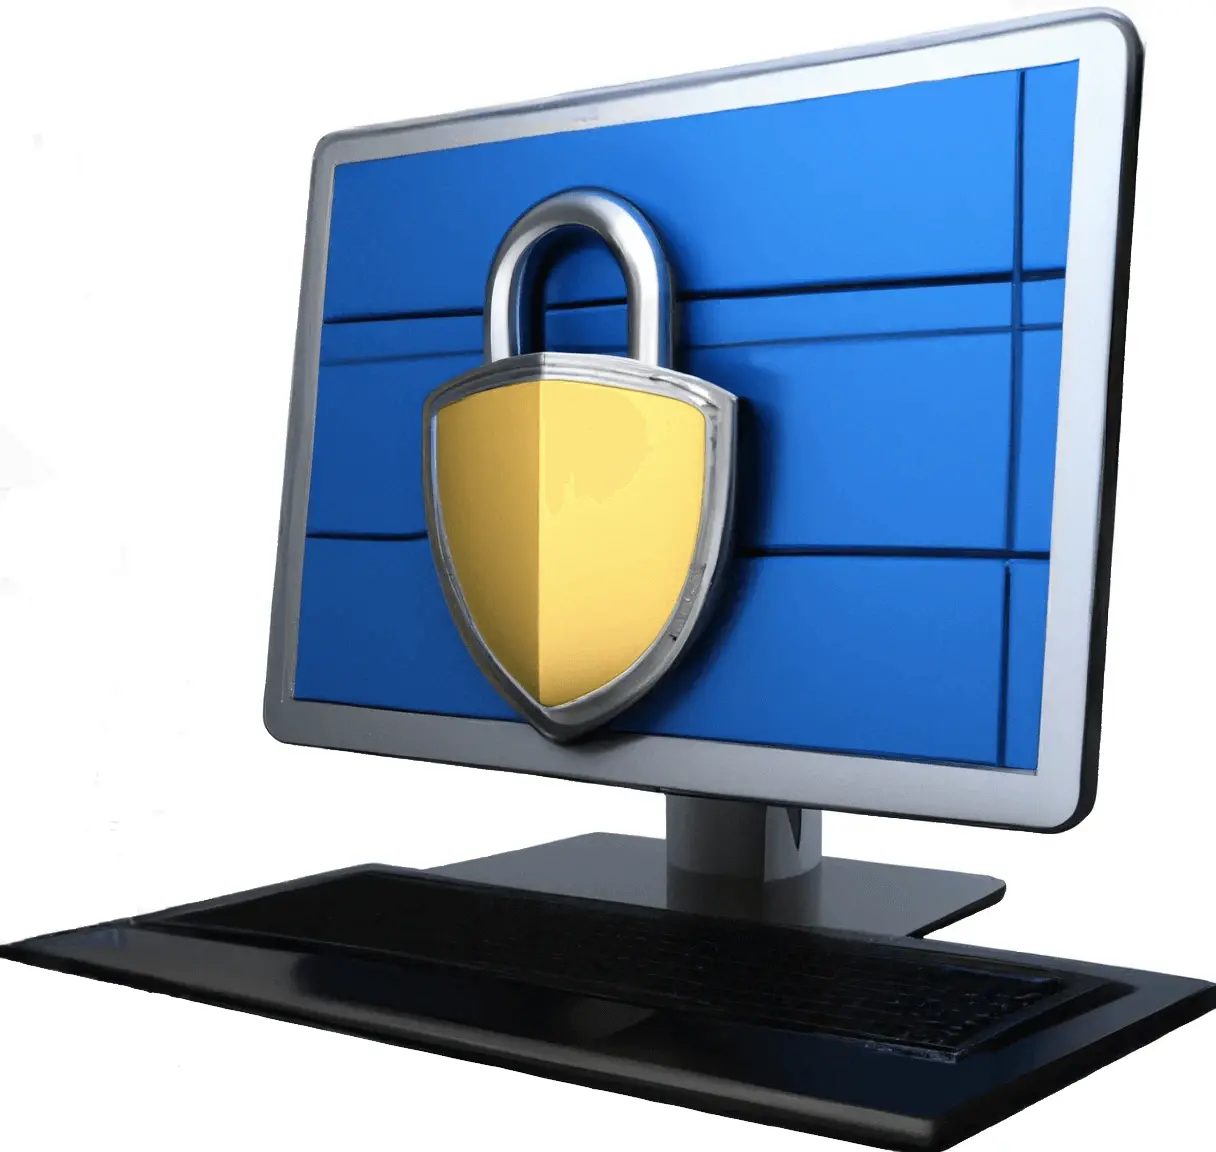 safe harbor can protect your website